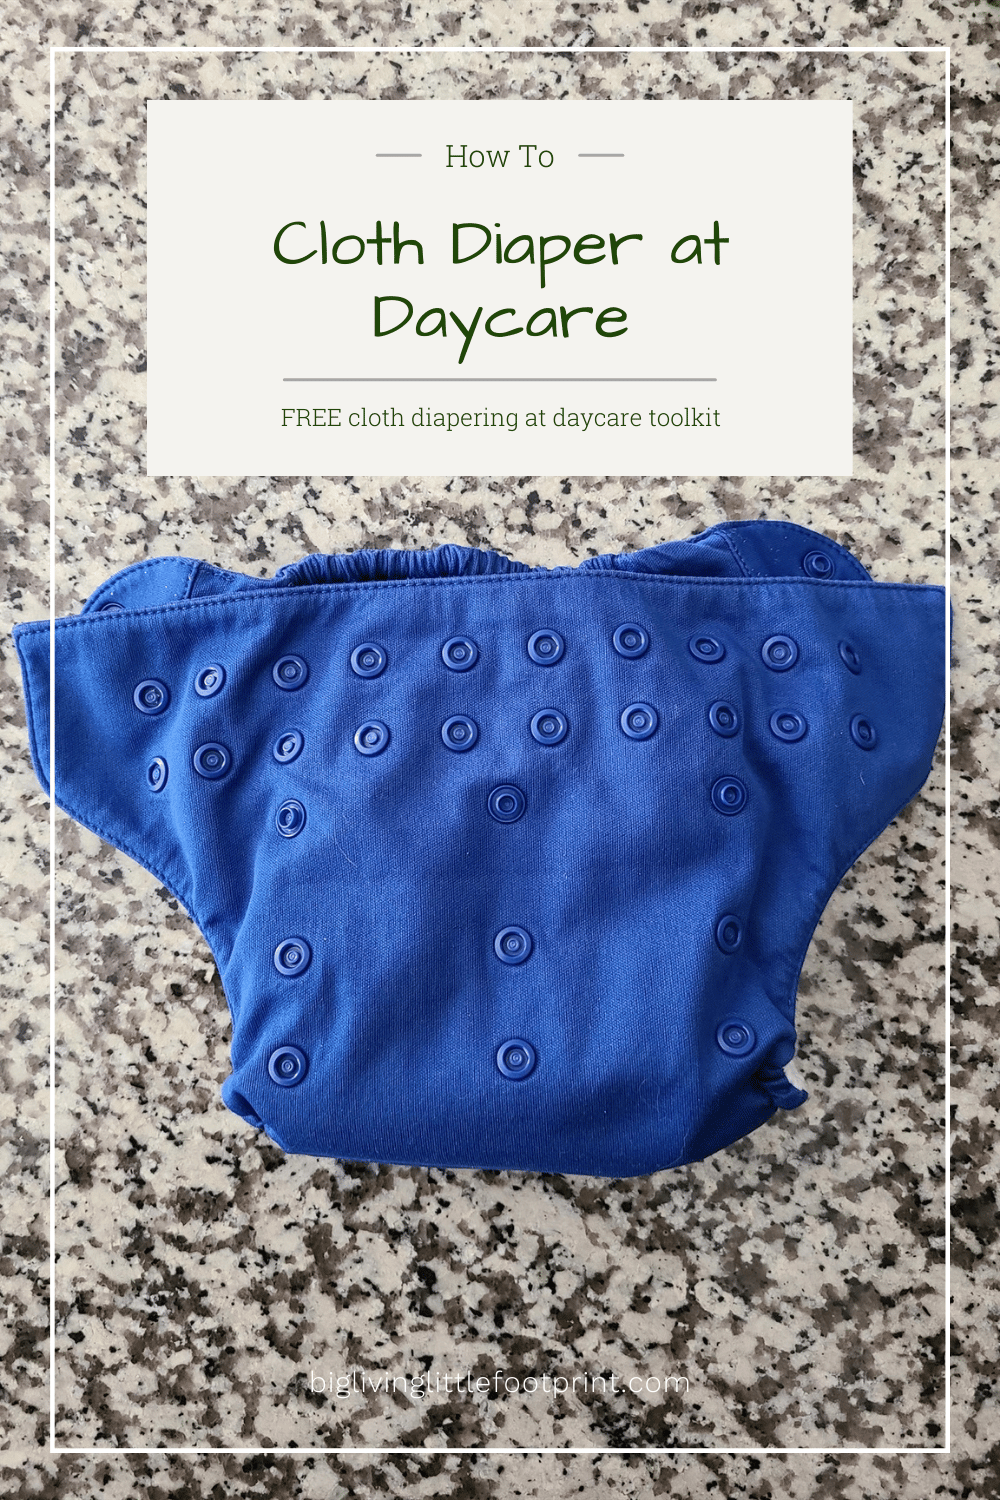 How to Cloth Diaper at Daycare